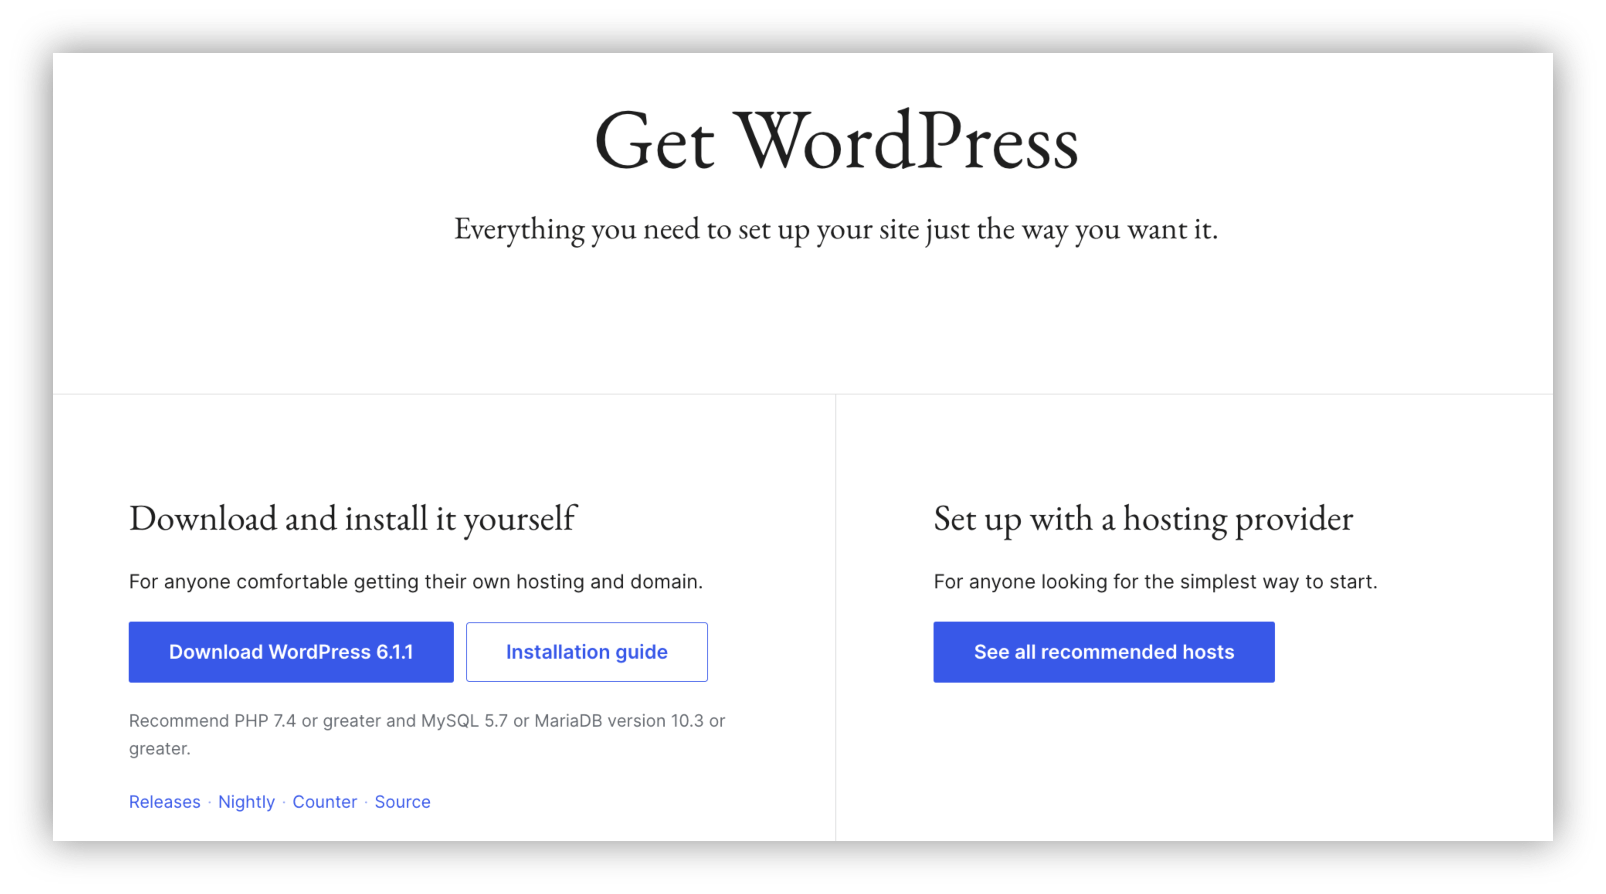 Create a WordPress install for your client portal